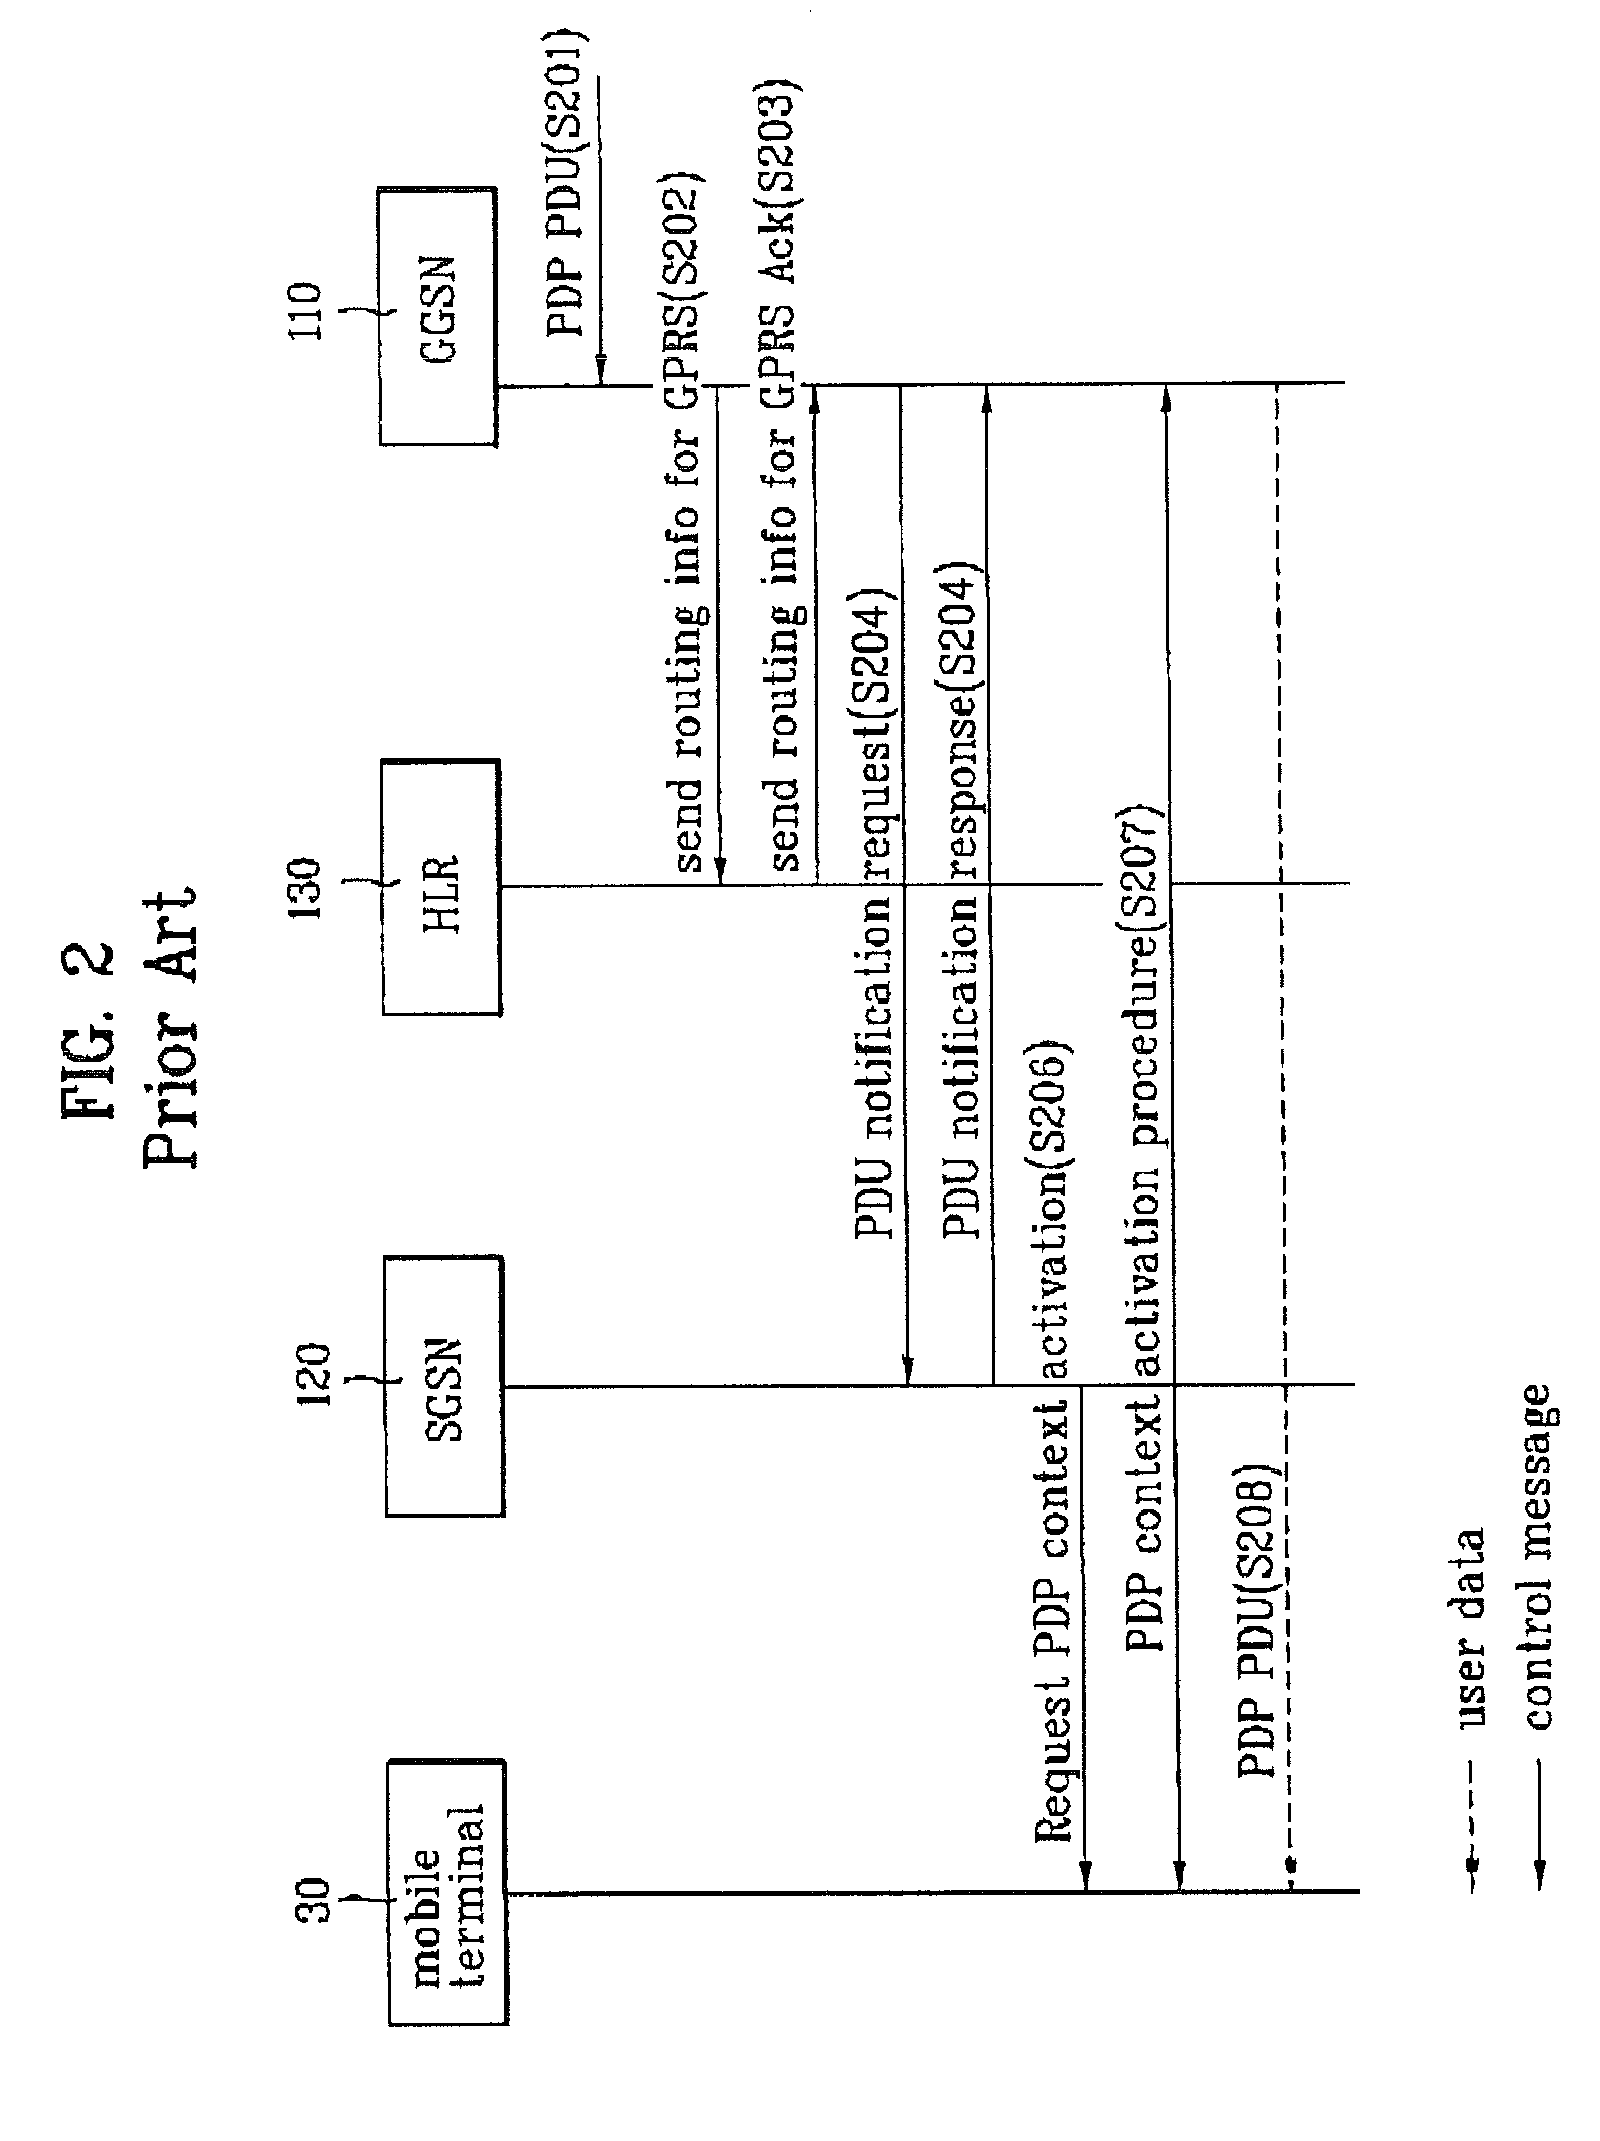 Method and apparatus for controlling a packet terminating call in a mobile communication system